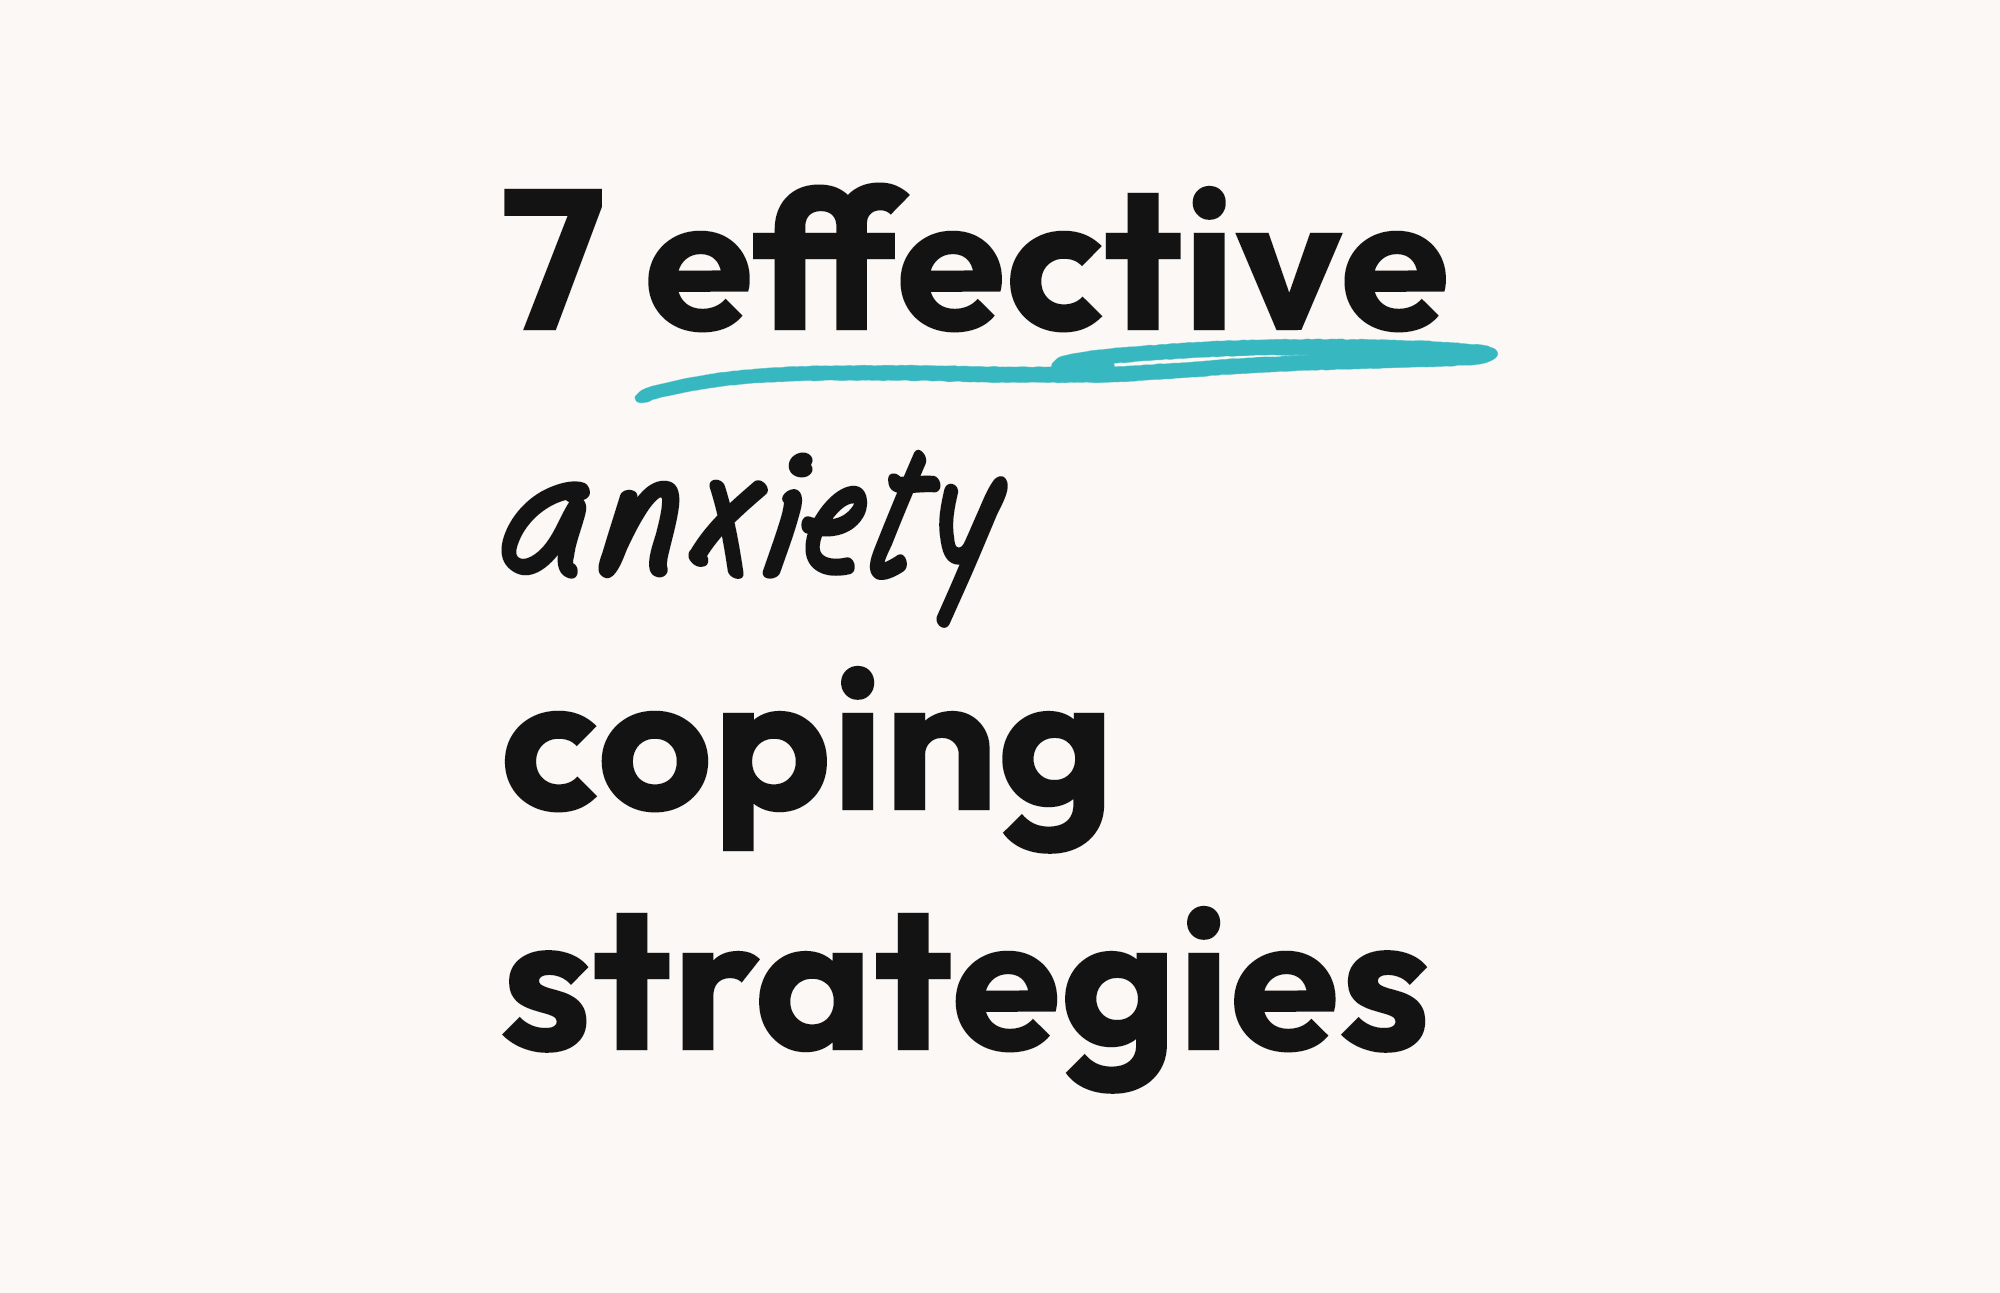 7-effective-anxiety-coping-strategies-heads-above-the-waves